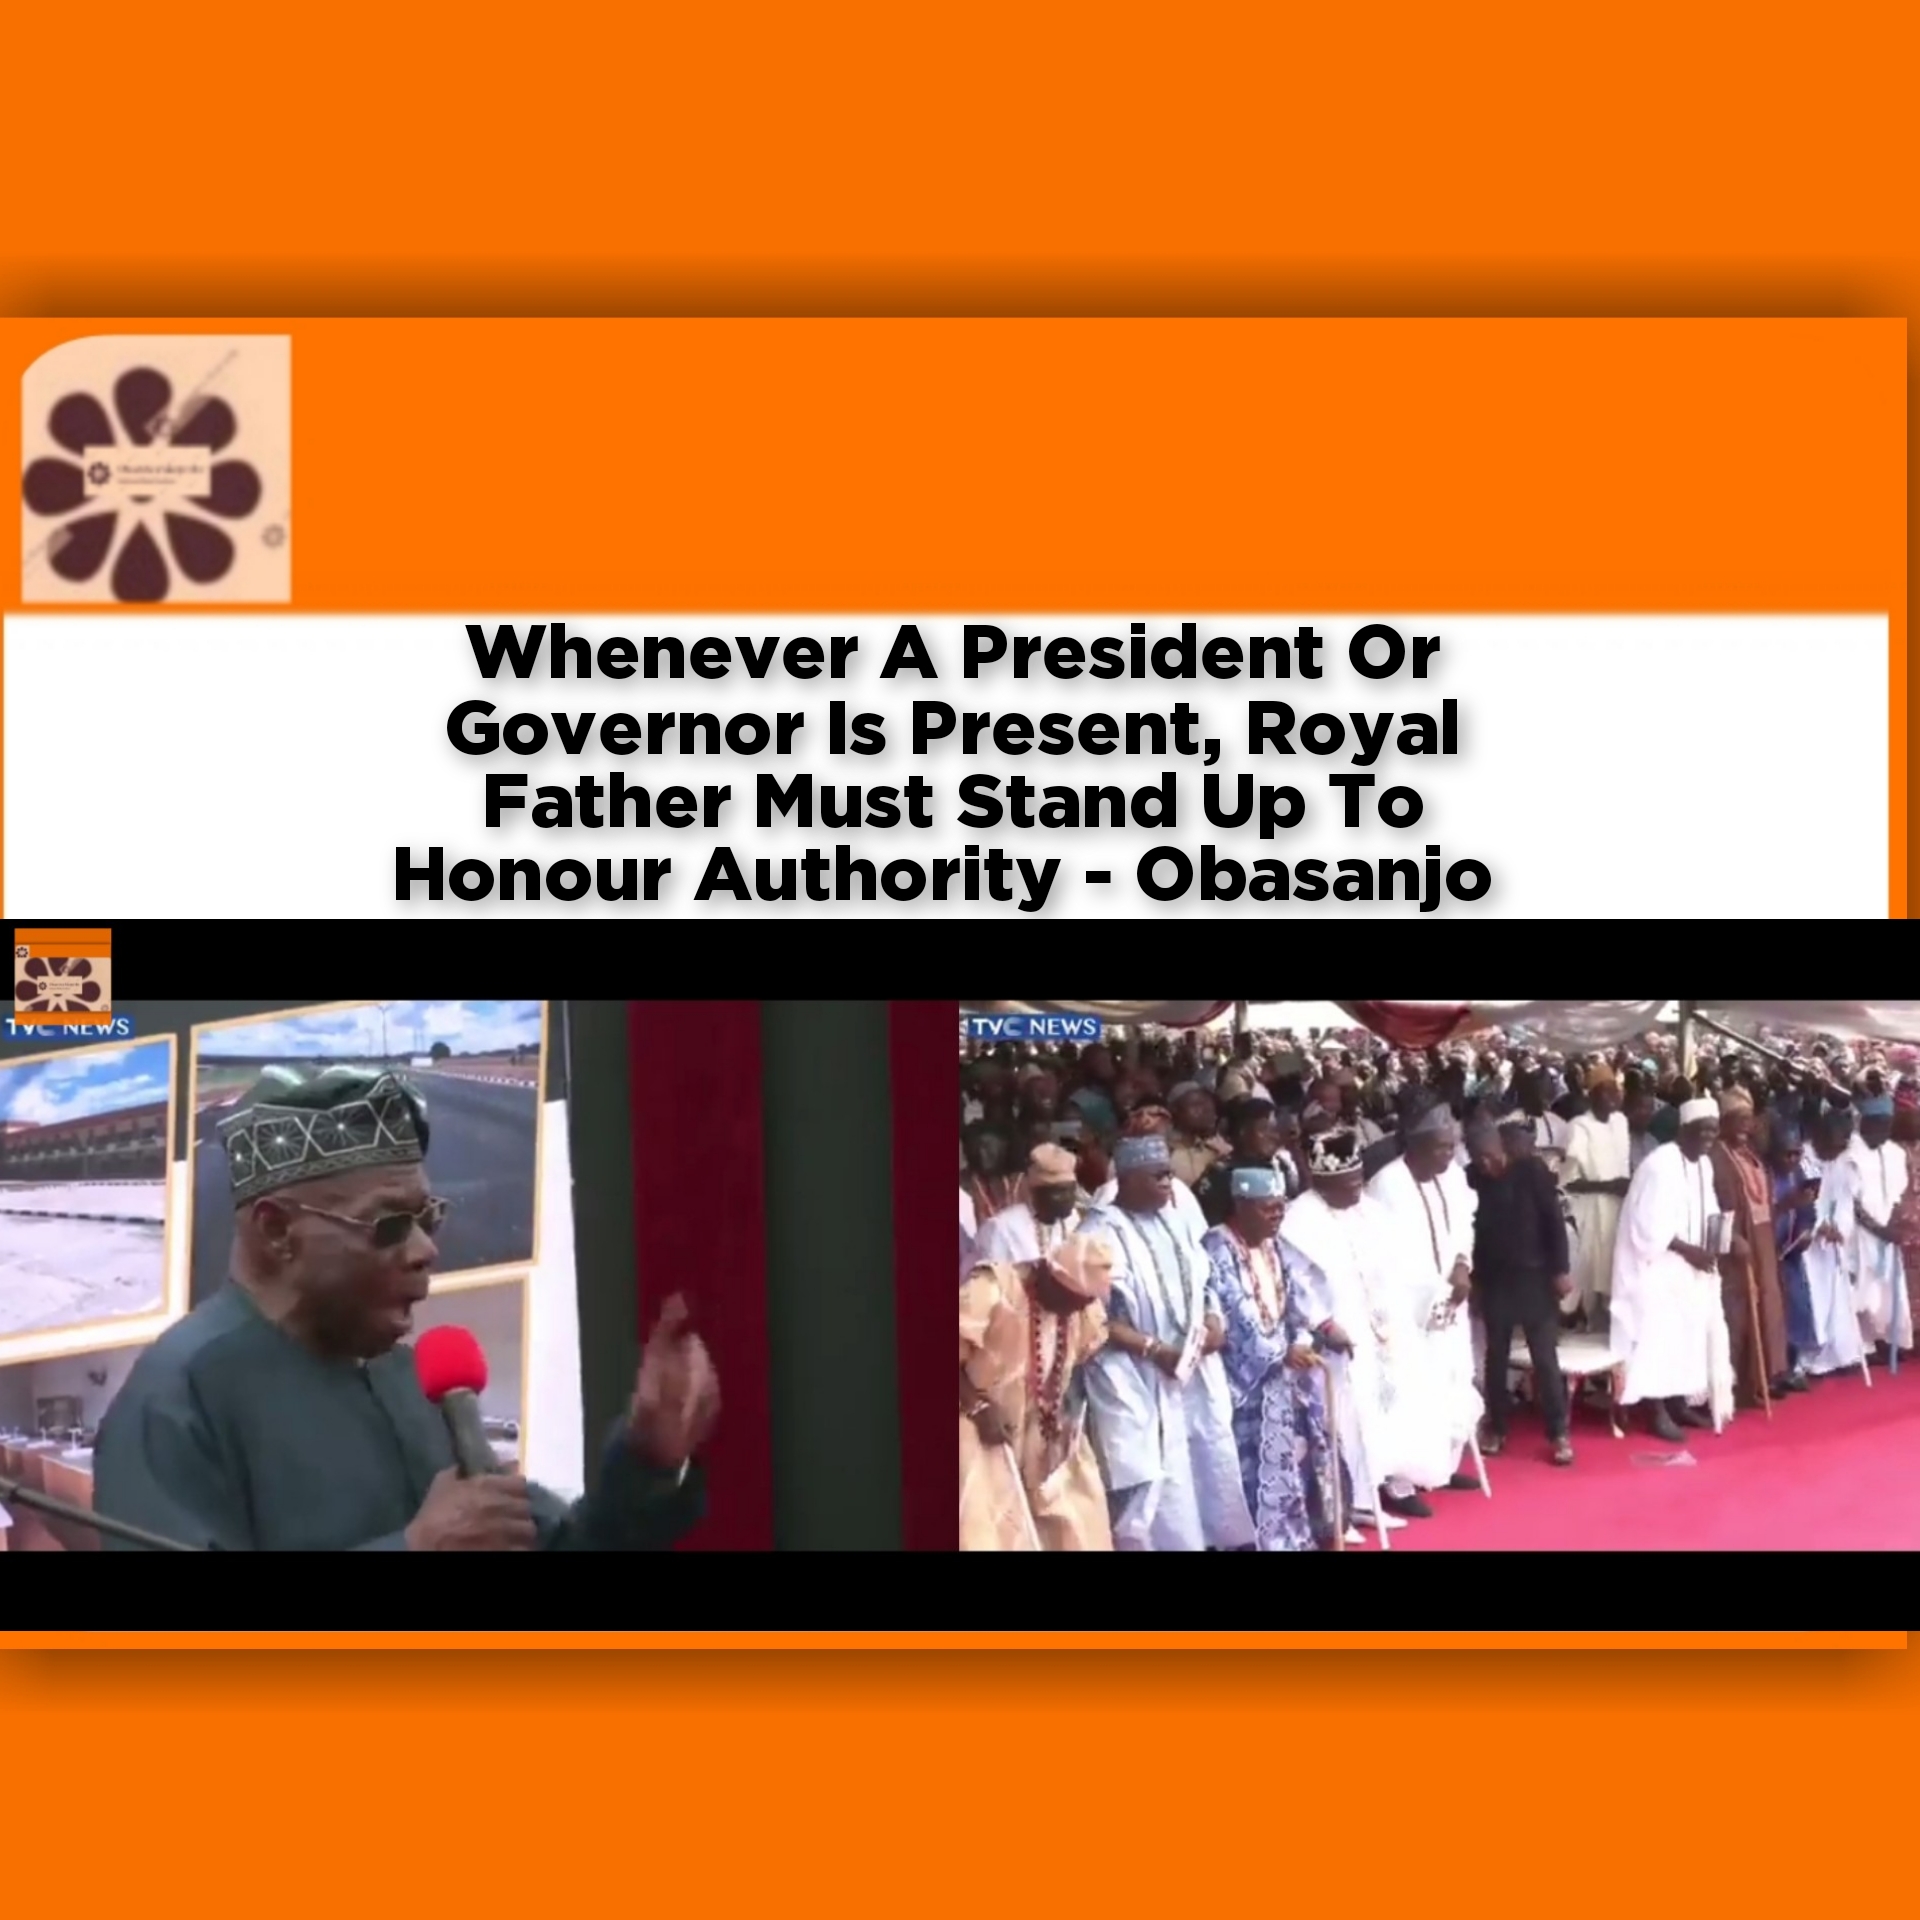 Whenever A President Or Governor Is Present, Royal Father Must Stand Up To Honour Authority - Obasanjo ~ OsazuwaAkonedo #Okechukwu